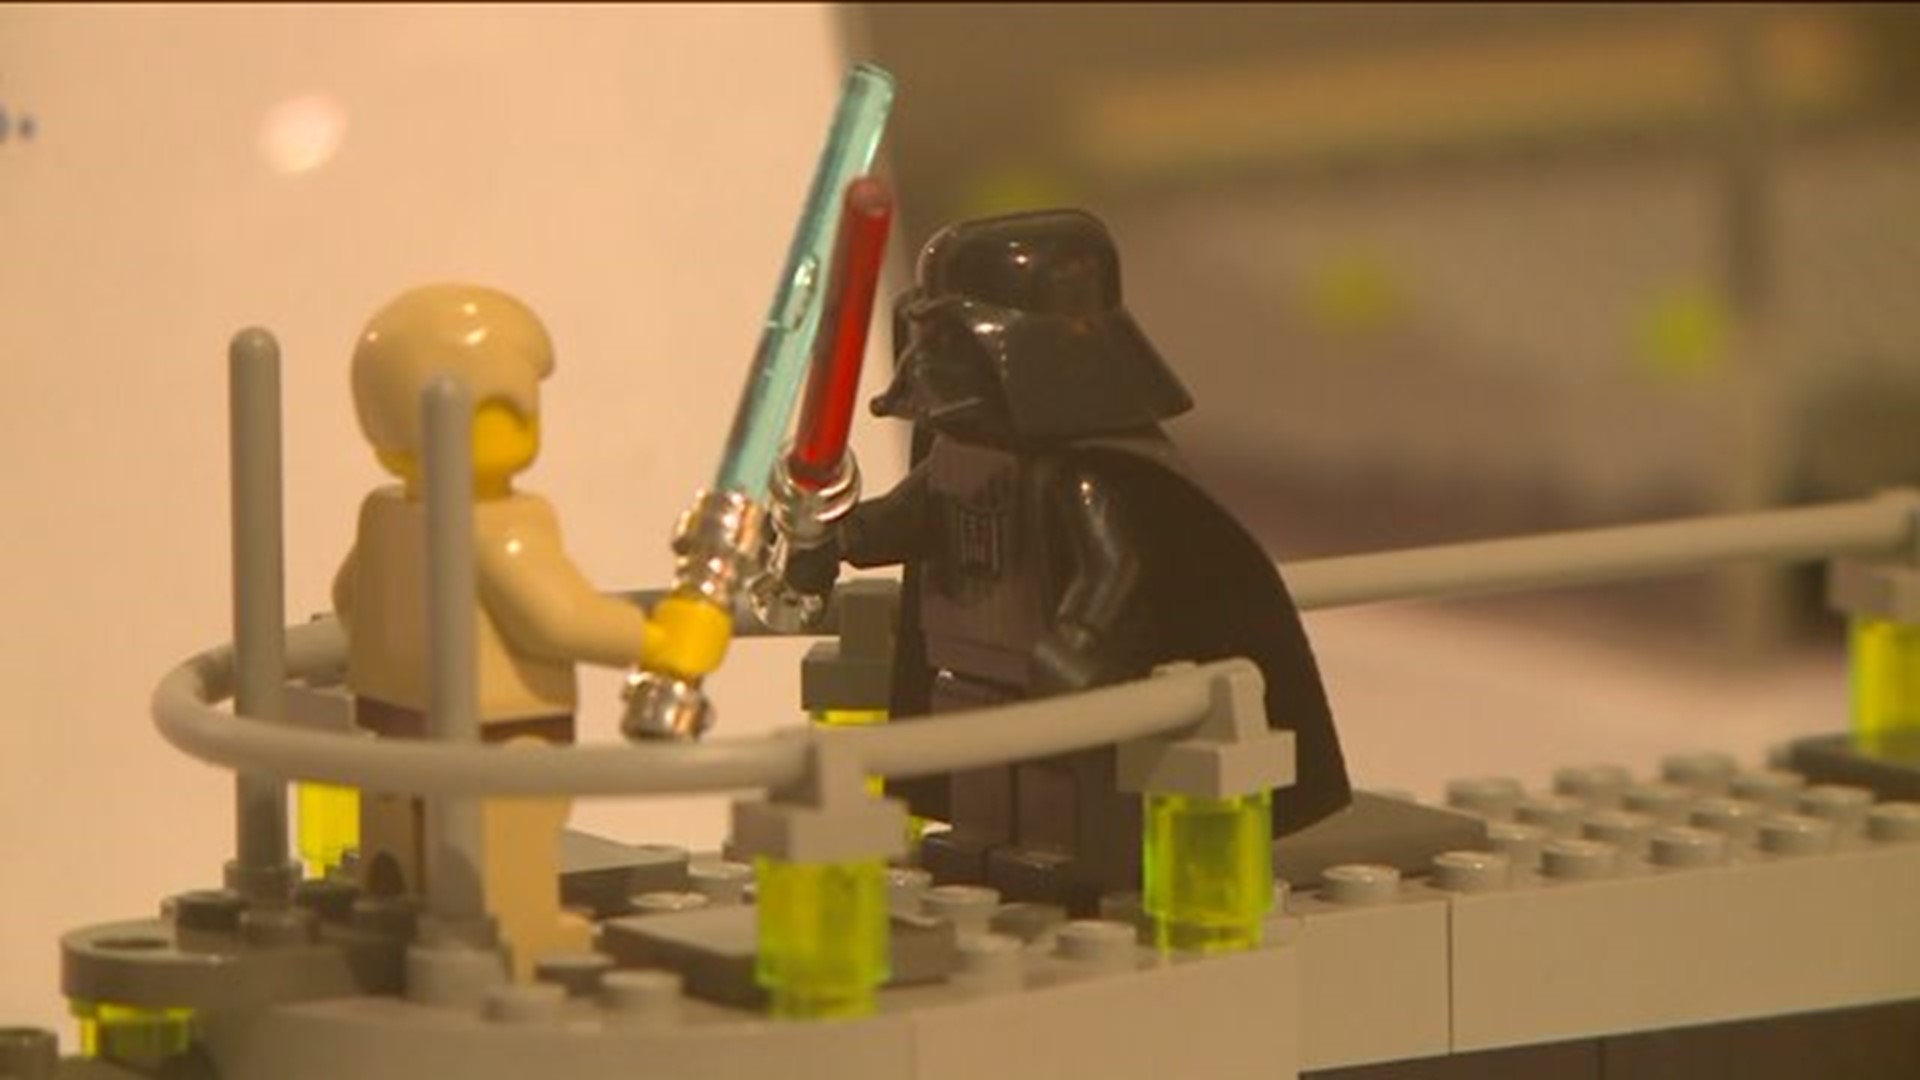 An exhibit fit for a Jedi master in Stamford